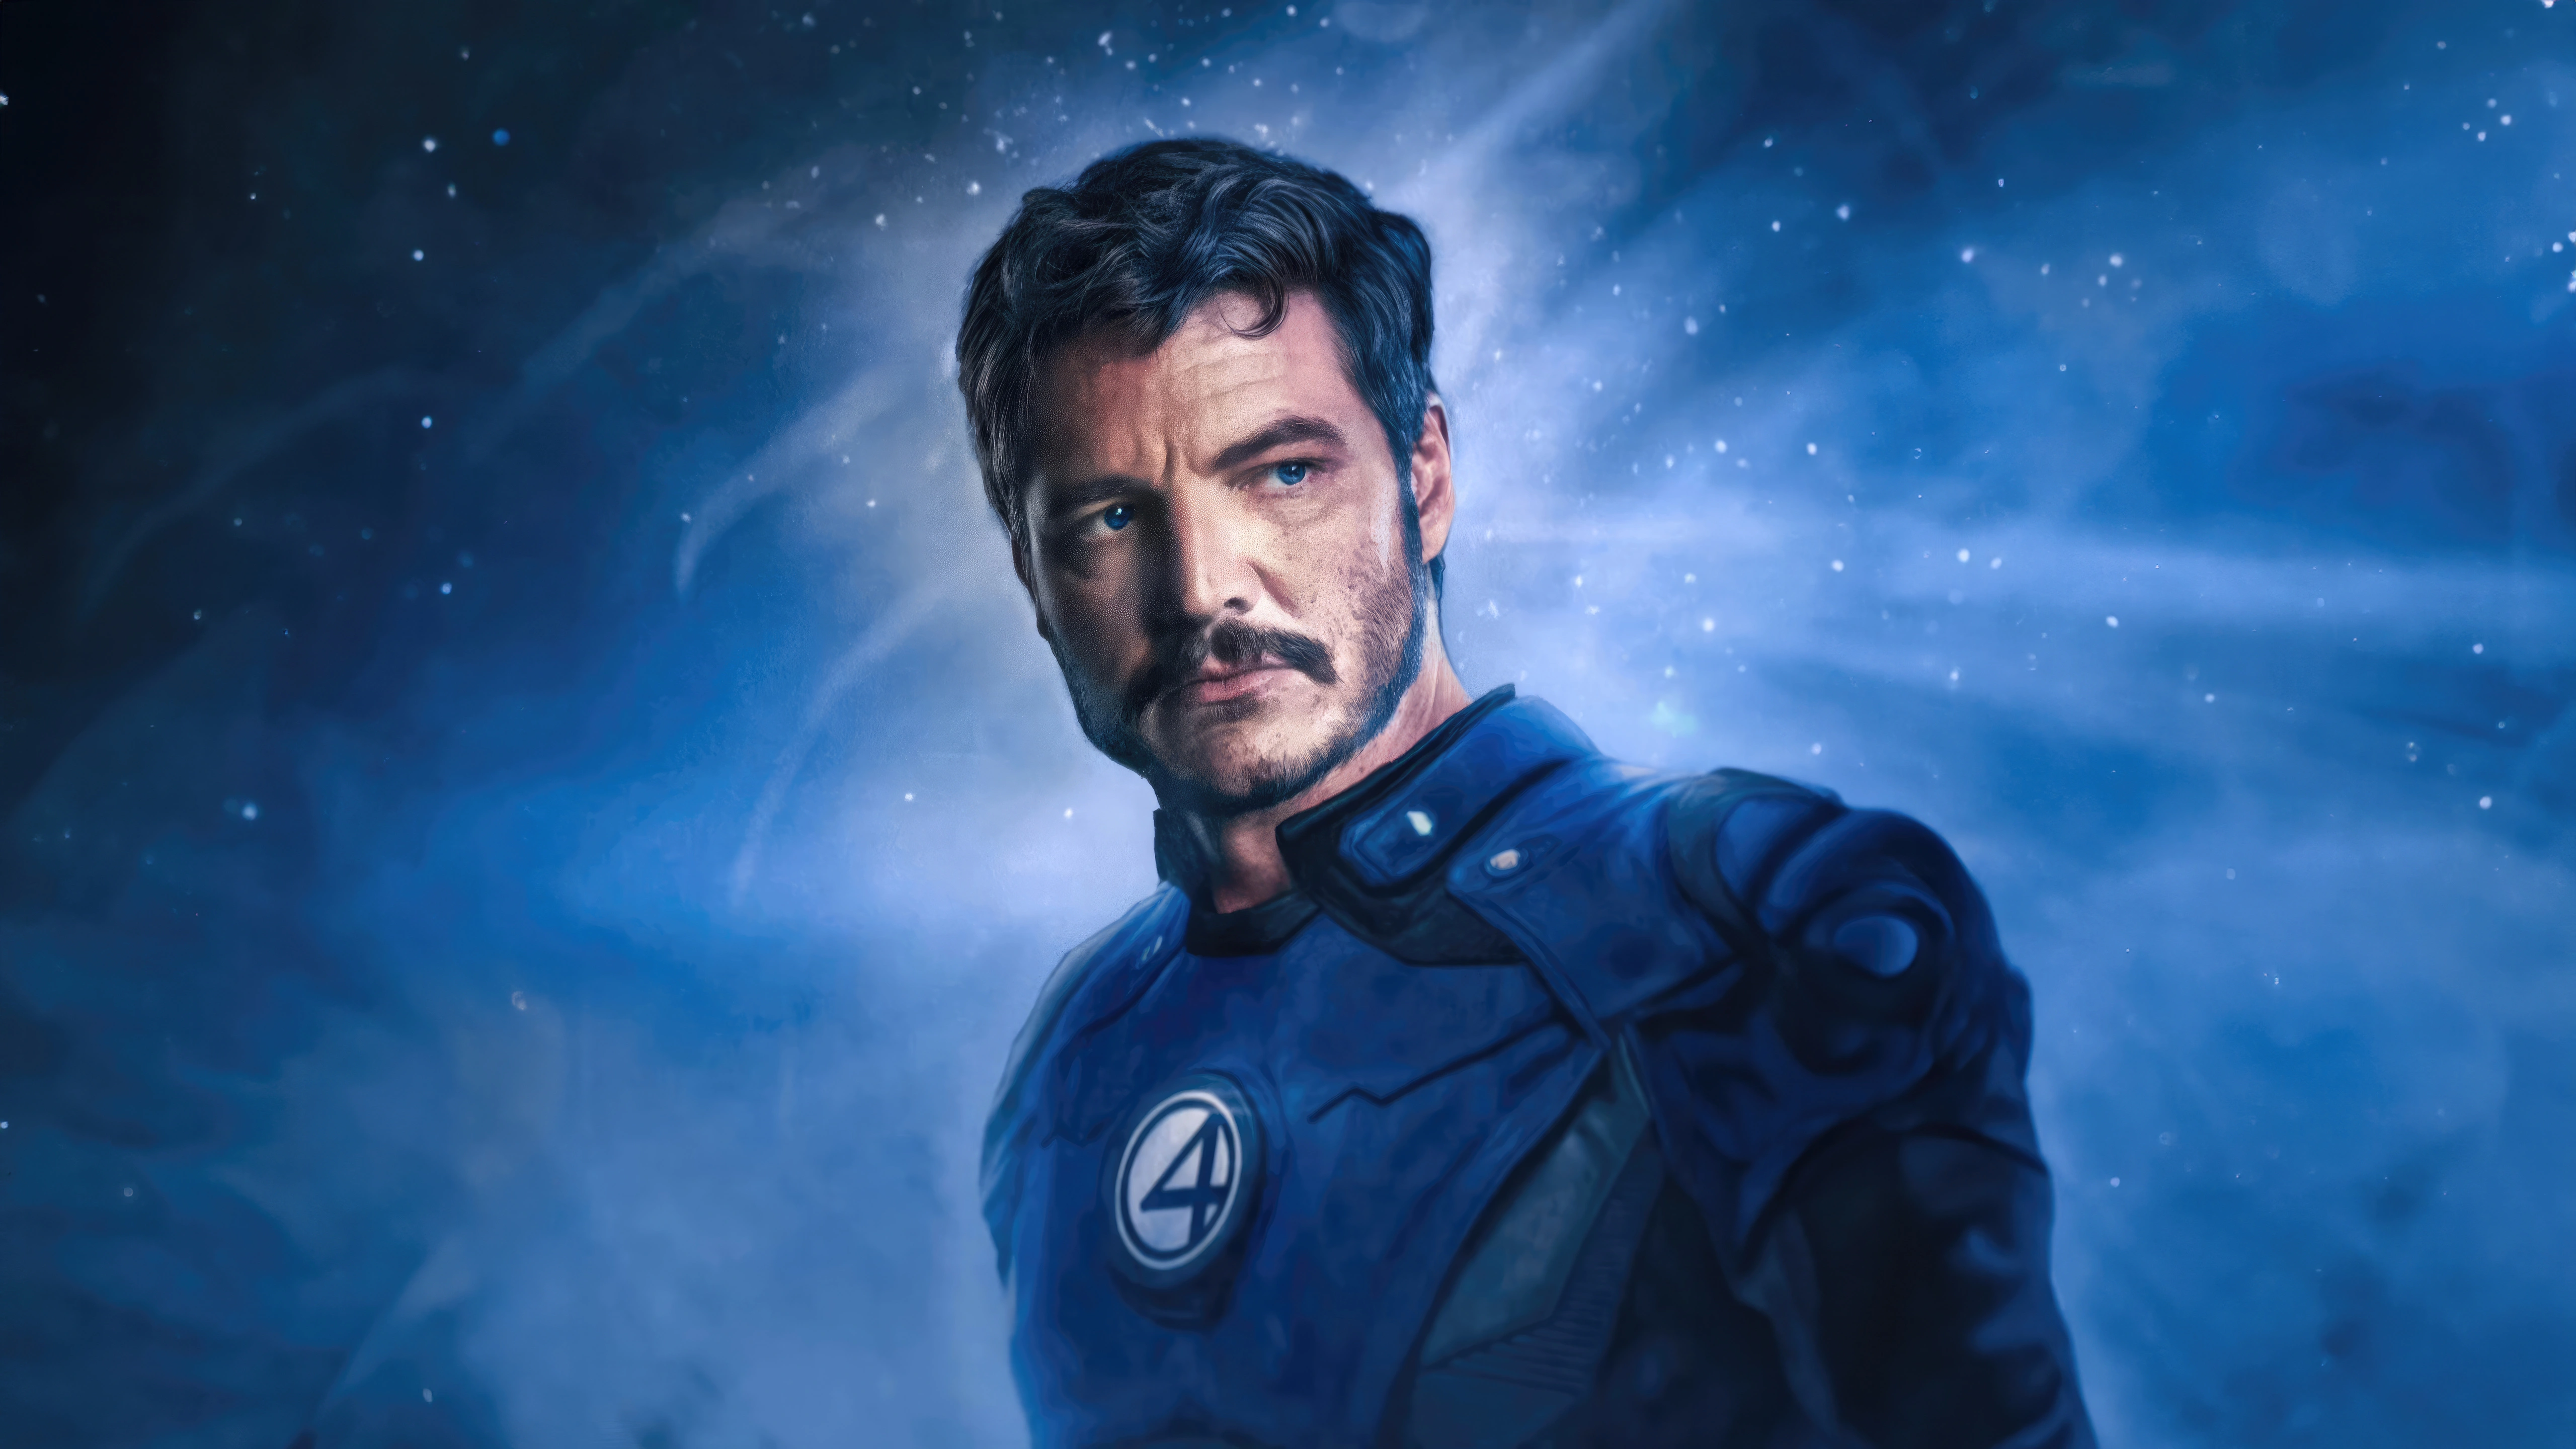 reed richards of the fantastic four rw.jpg